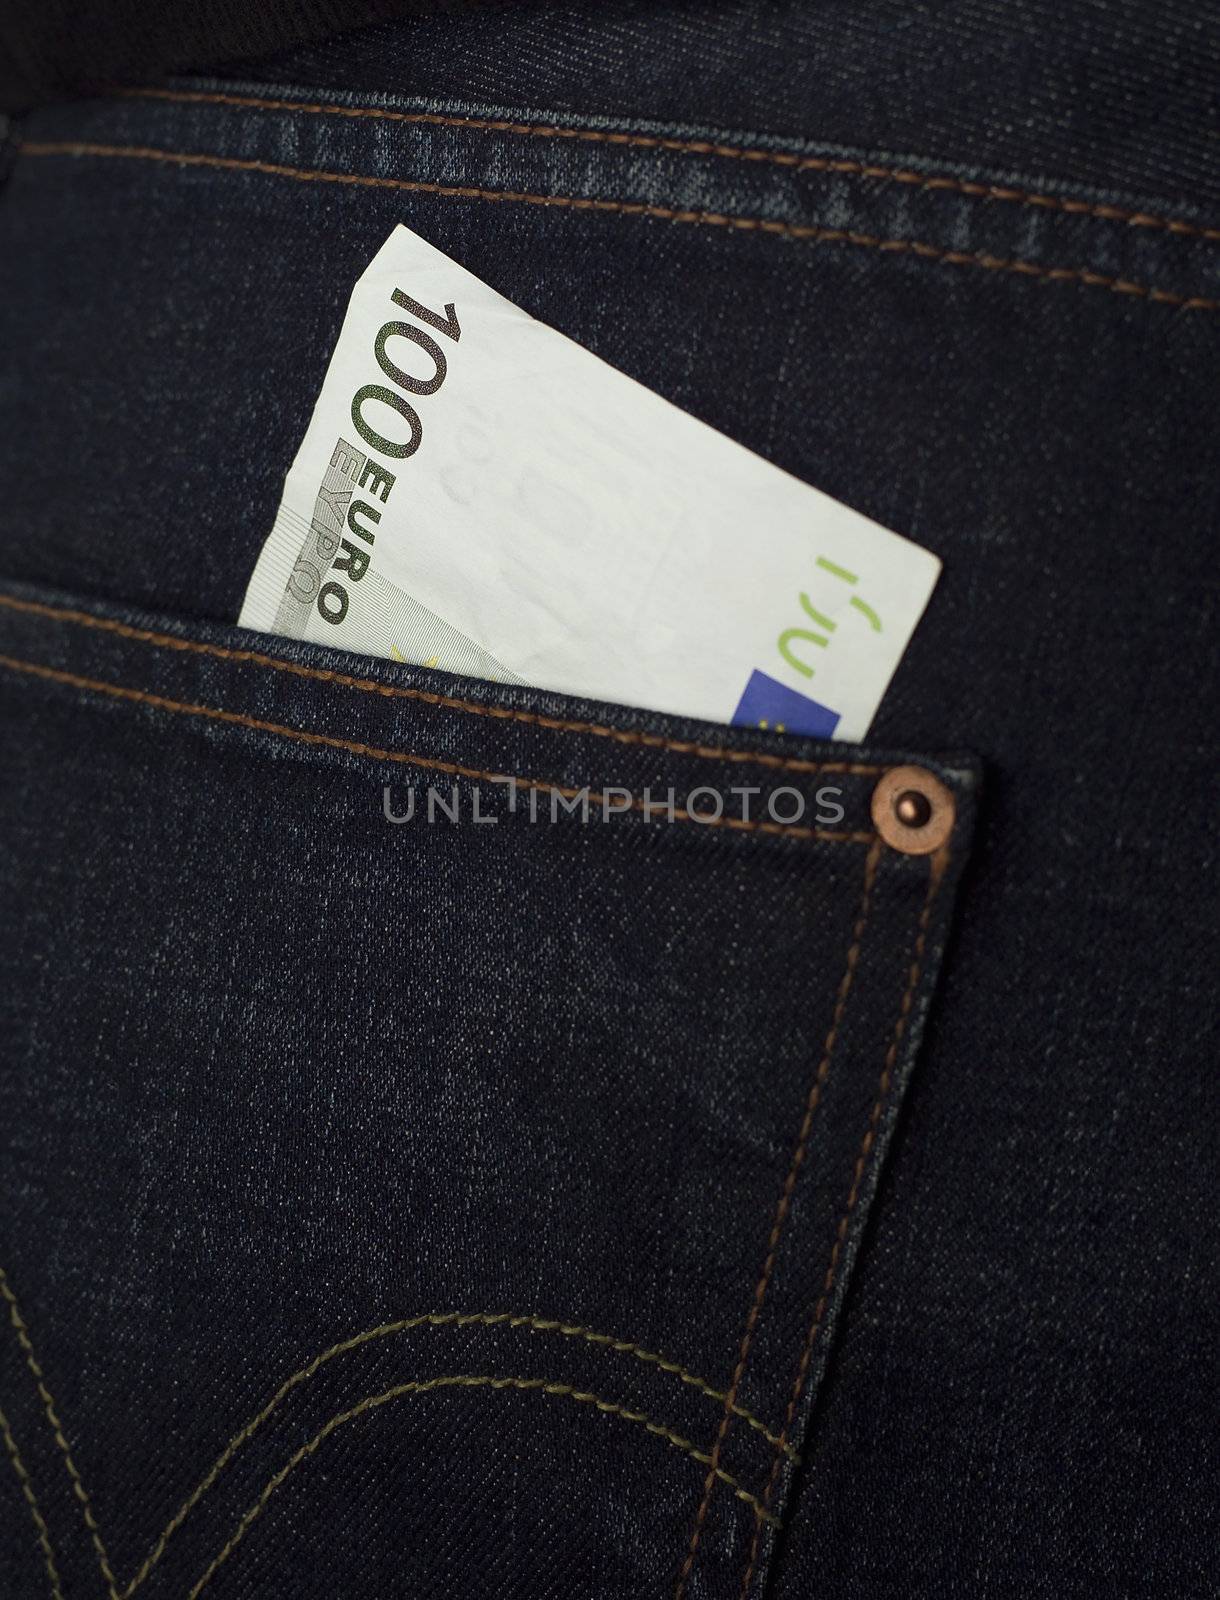 100 Euro Bank note in a jeans pocket